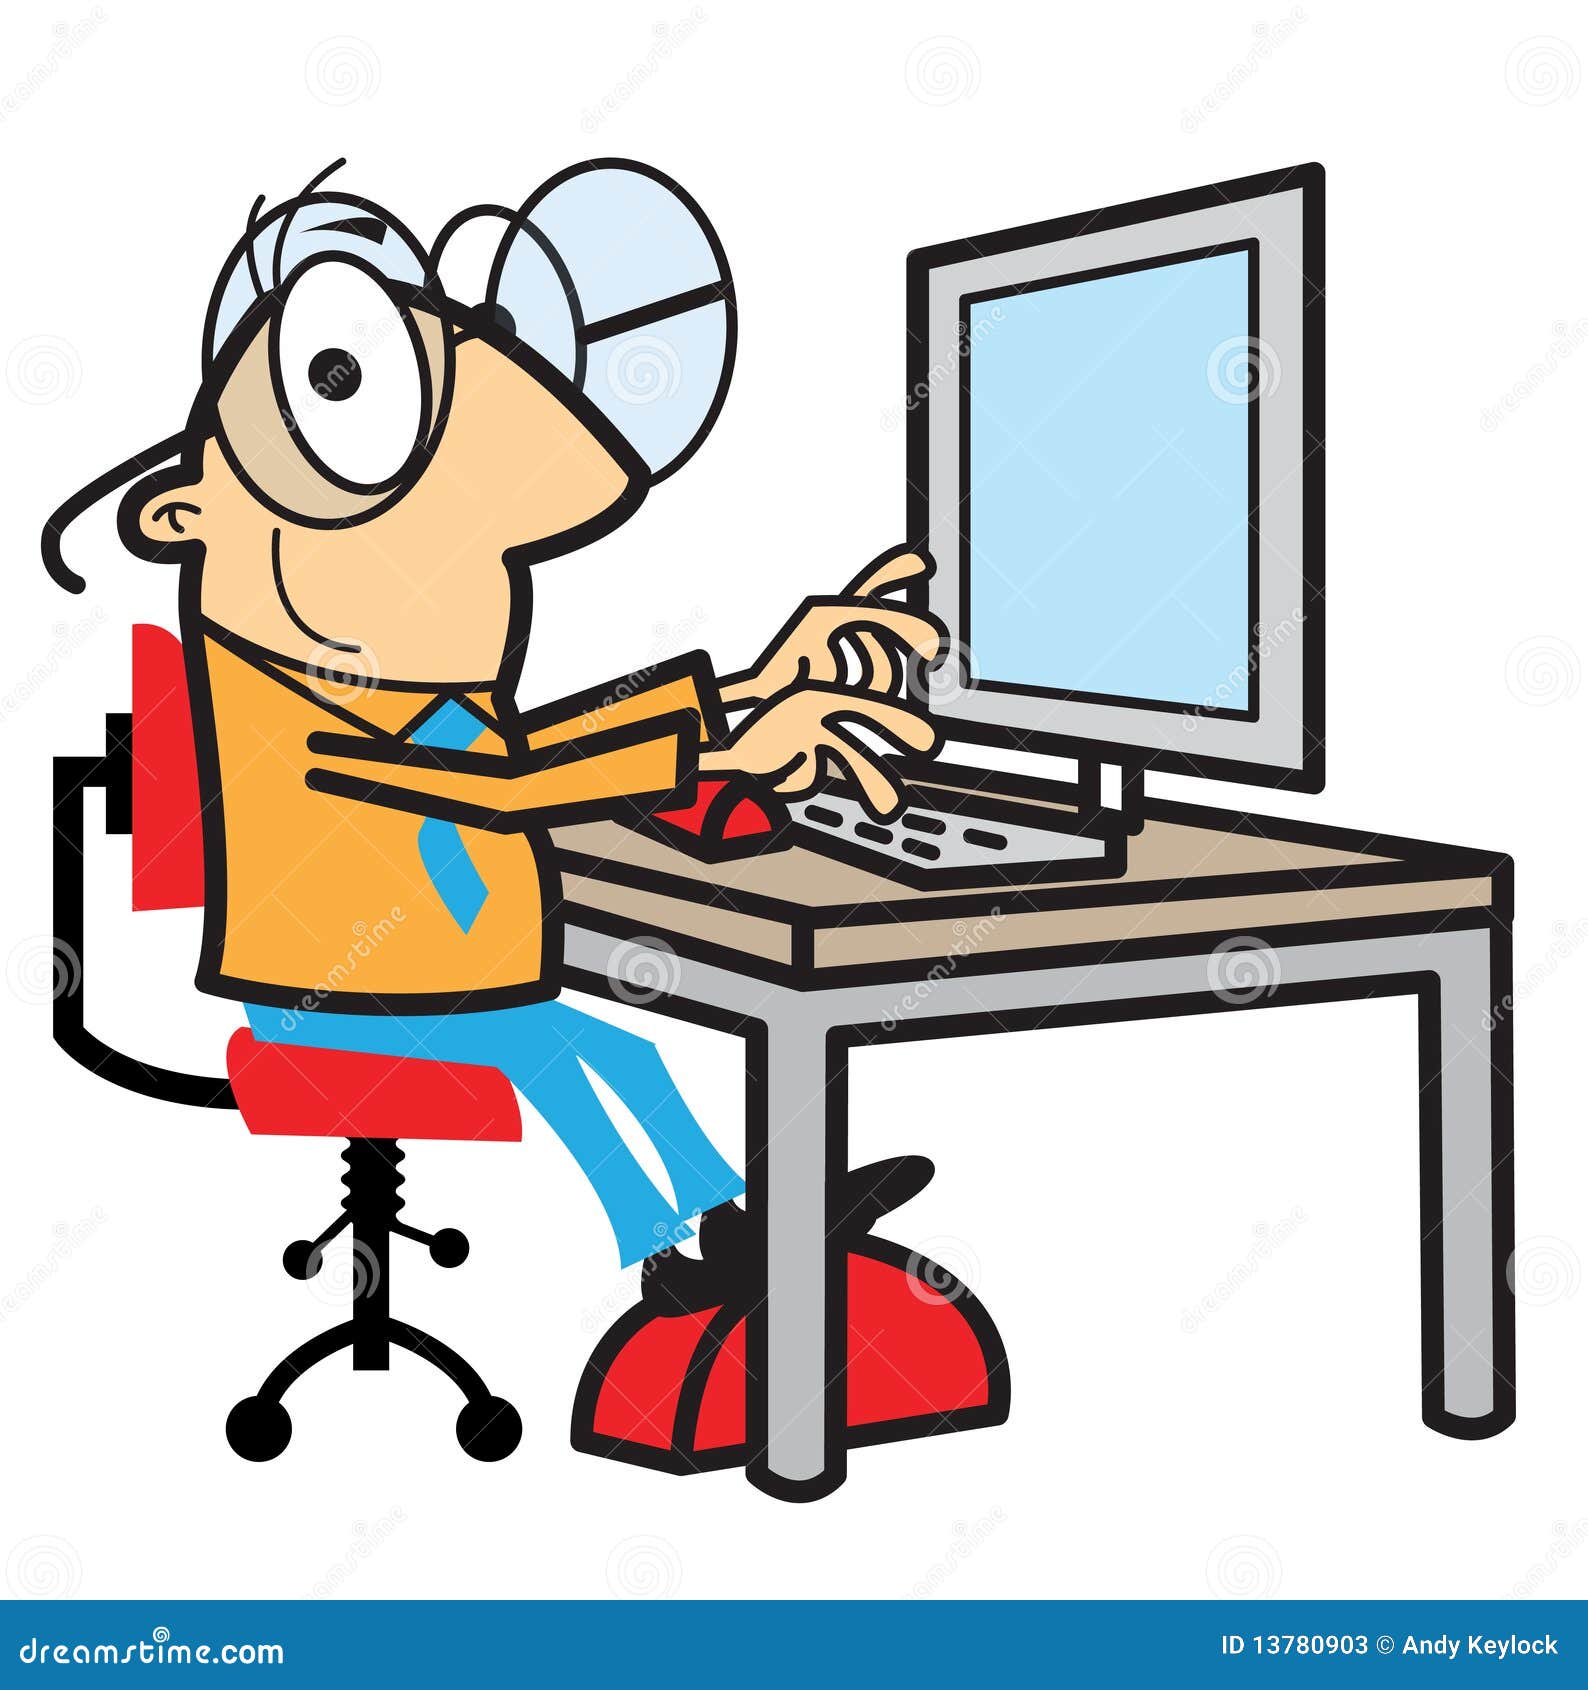 clipart man working at desk - photo #41